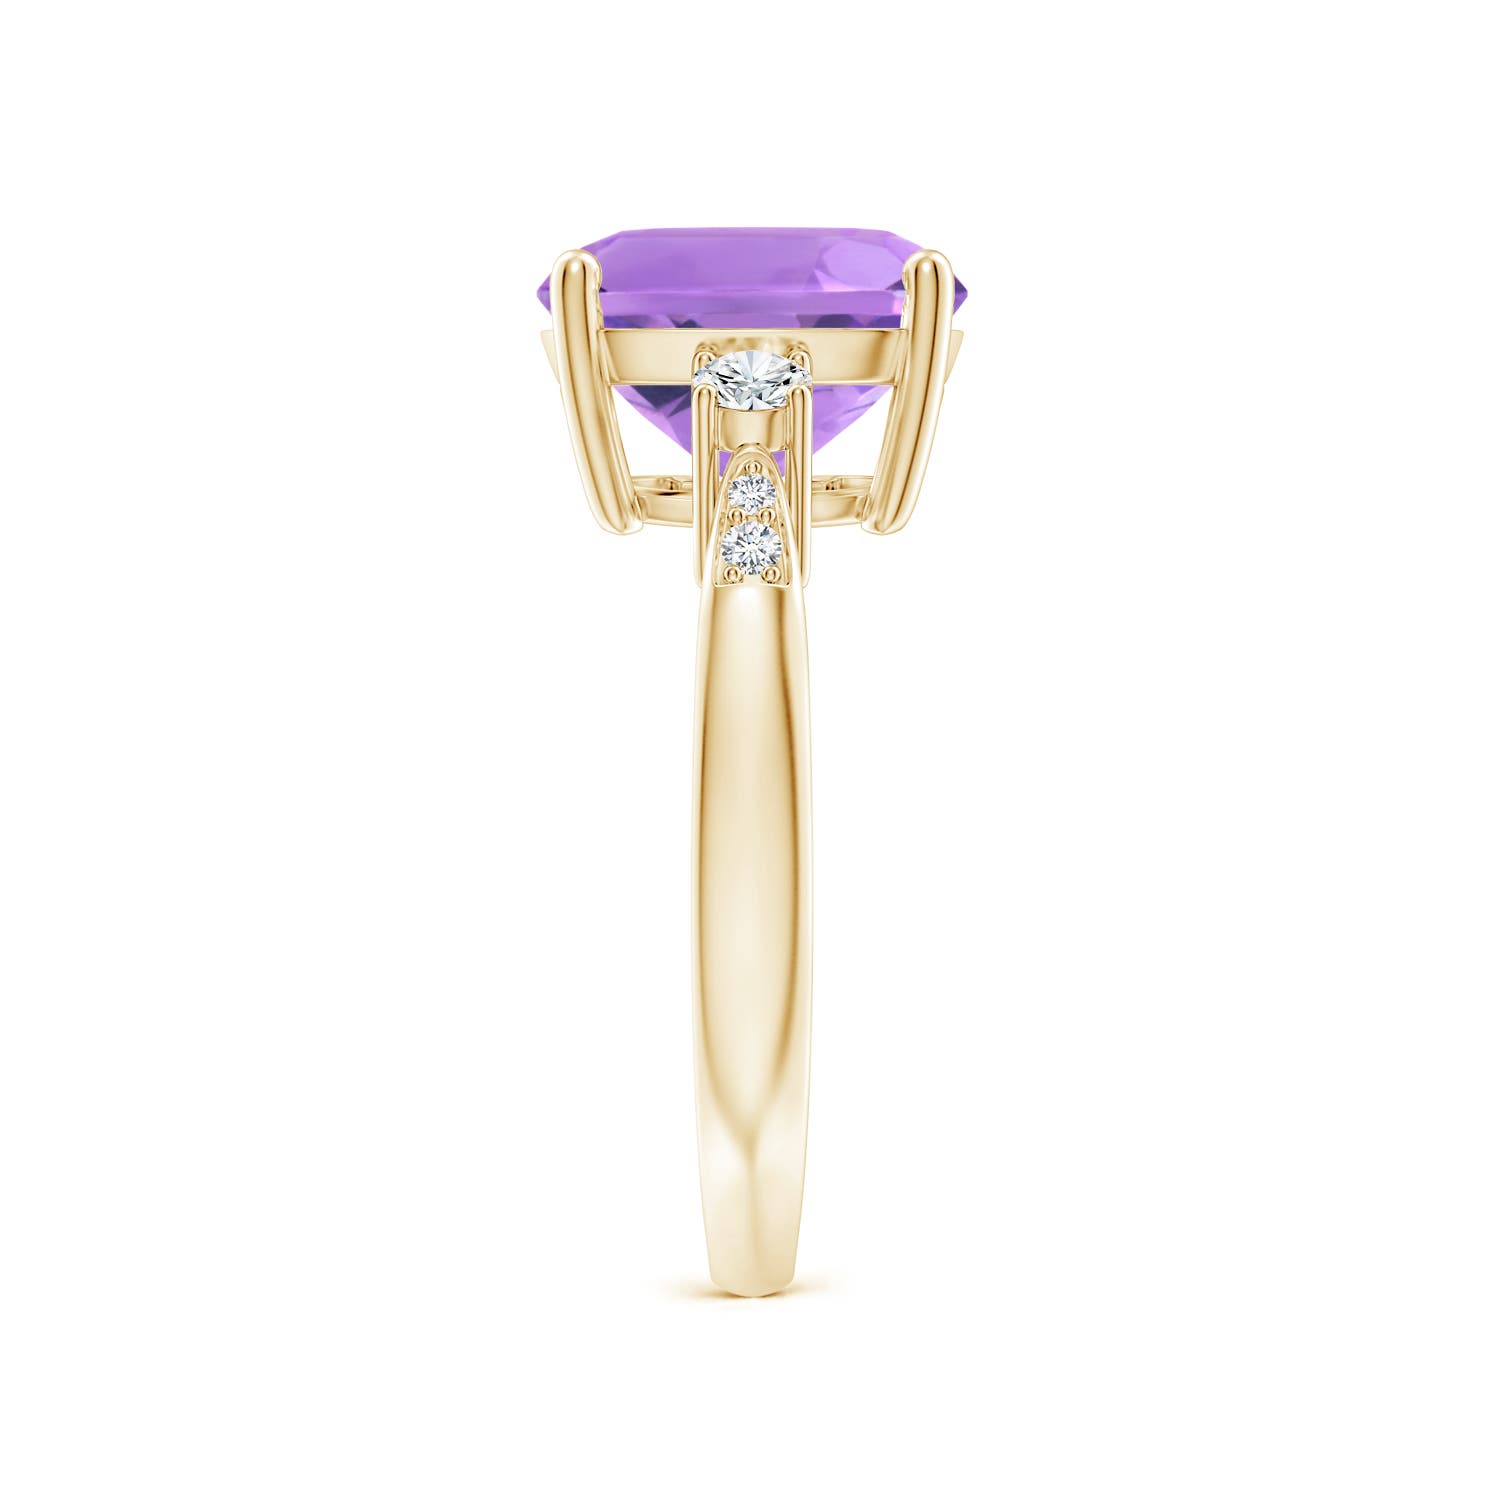 A - Amethyst / 3.85 CT / 14 KT Yellow Gold